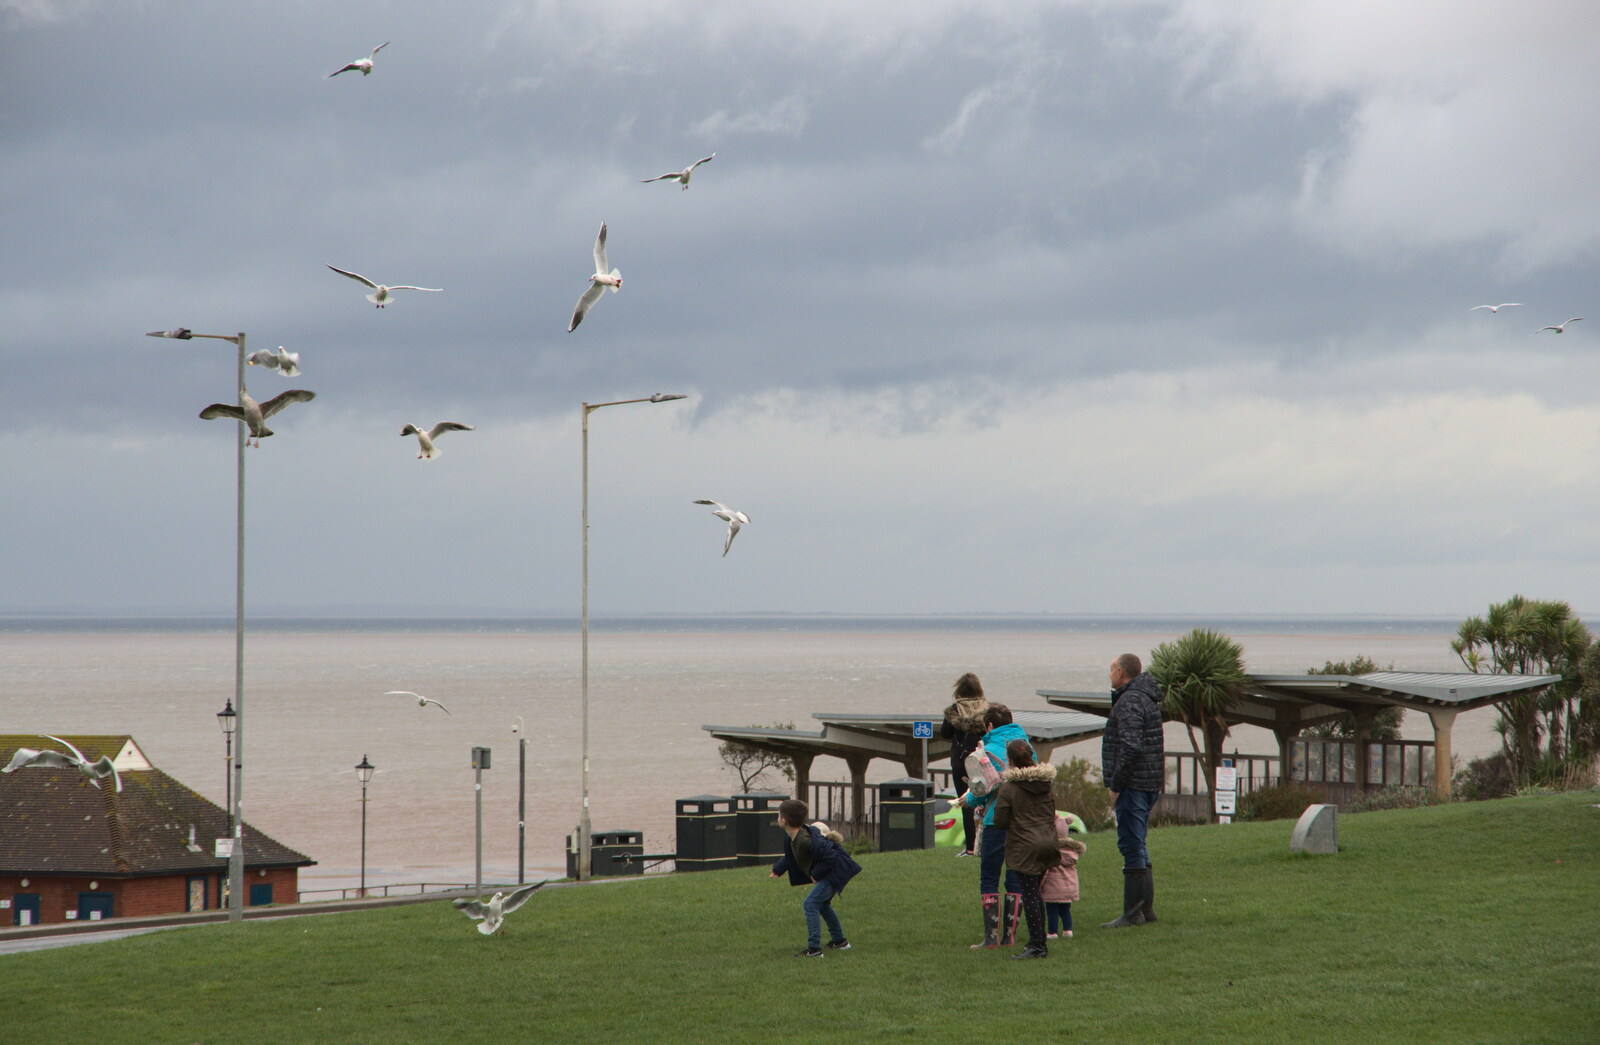 Kids lob bread at the gulls from A Postcard From Kings Lynn and "Sunny Hunny" Hunstanton, Norfolk - 31st October 2020